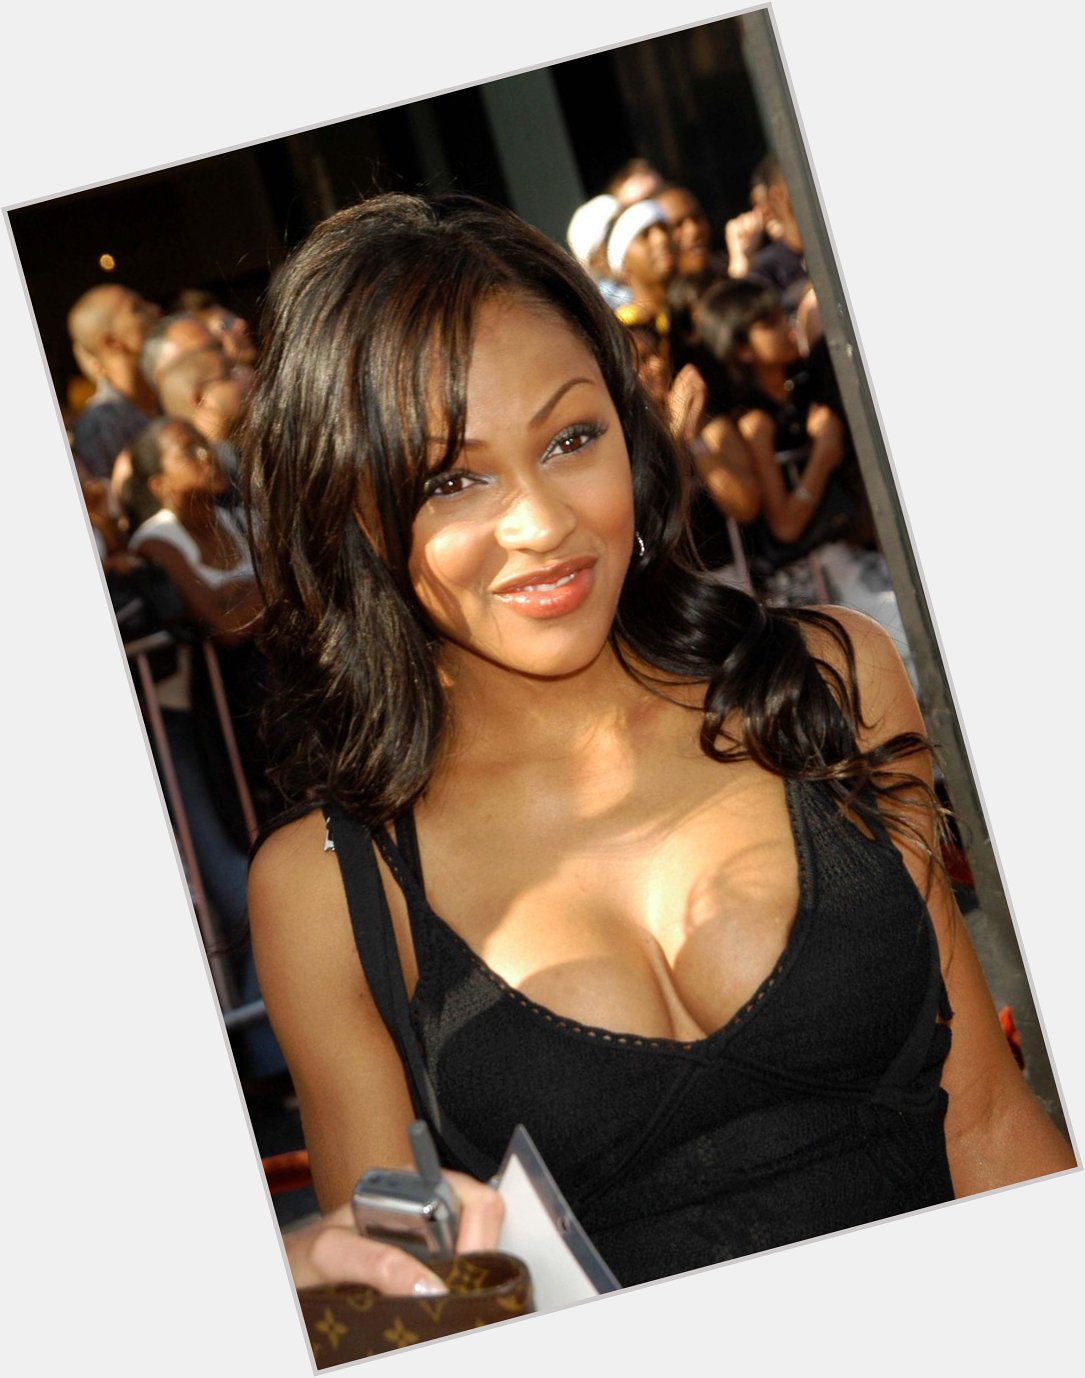 Happy 40th Birthday Shout Out to the lovely Meagan Good!! 